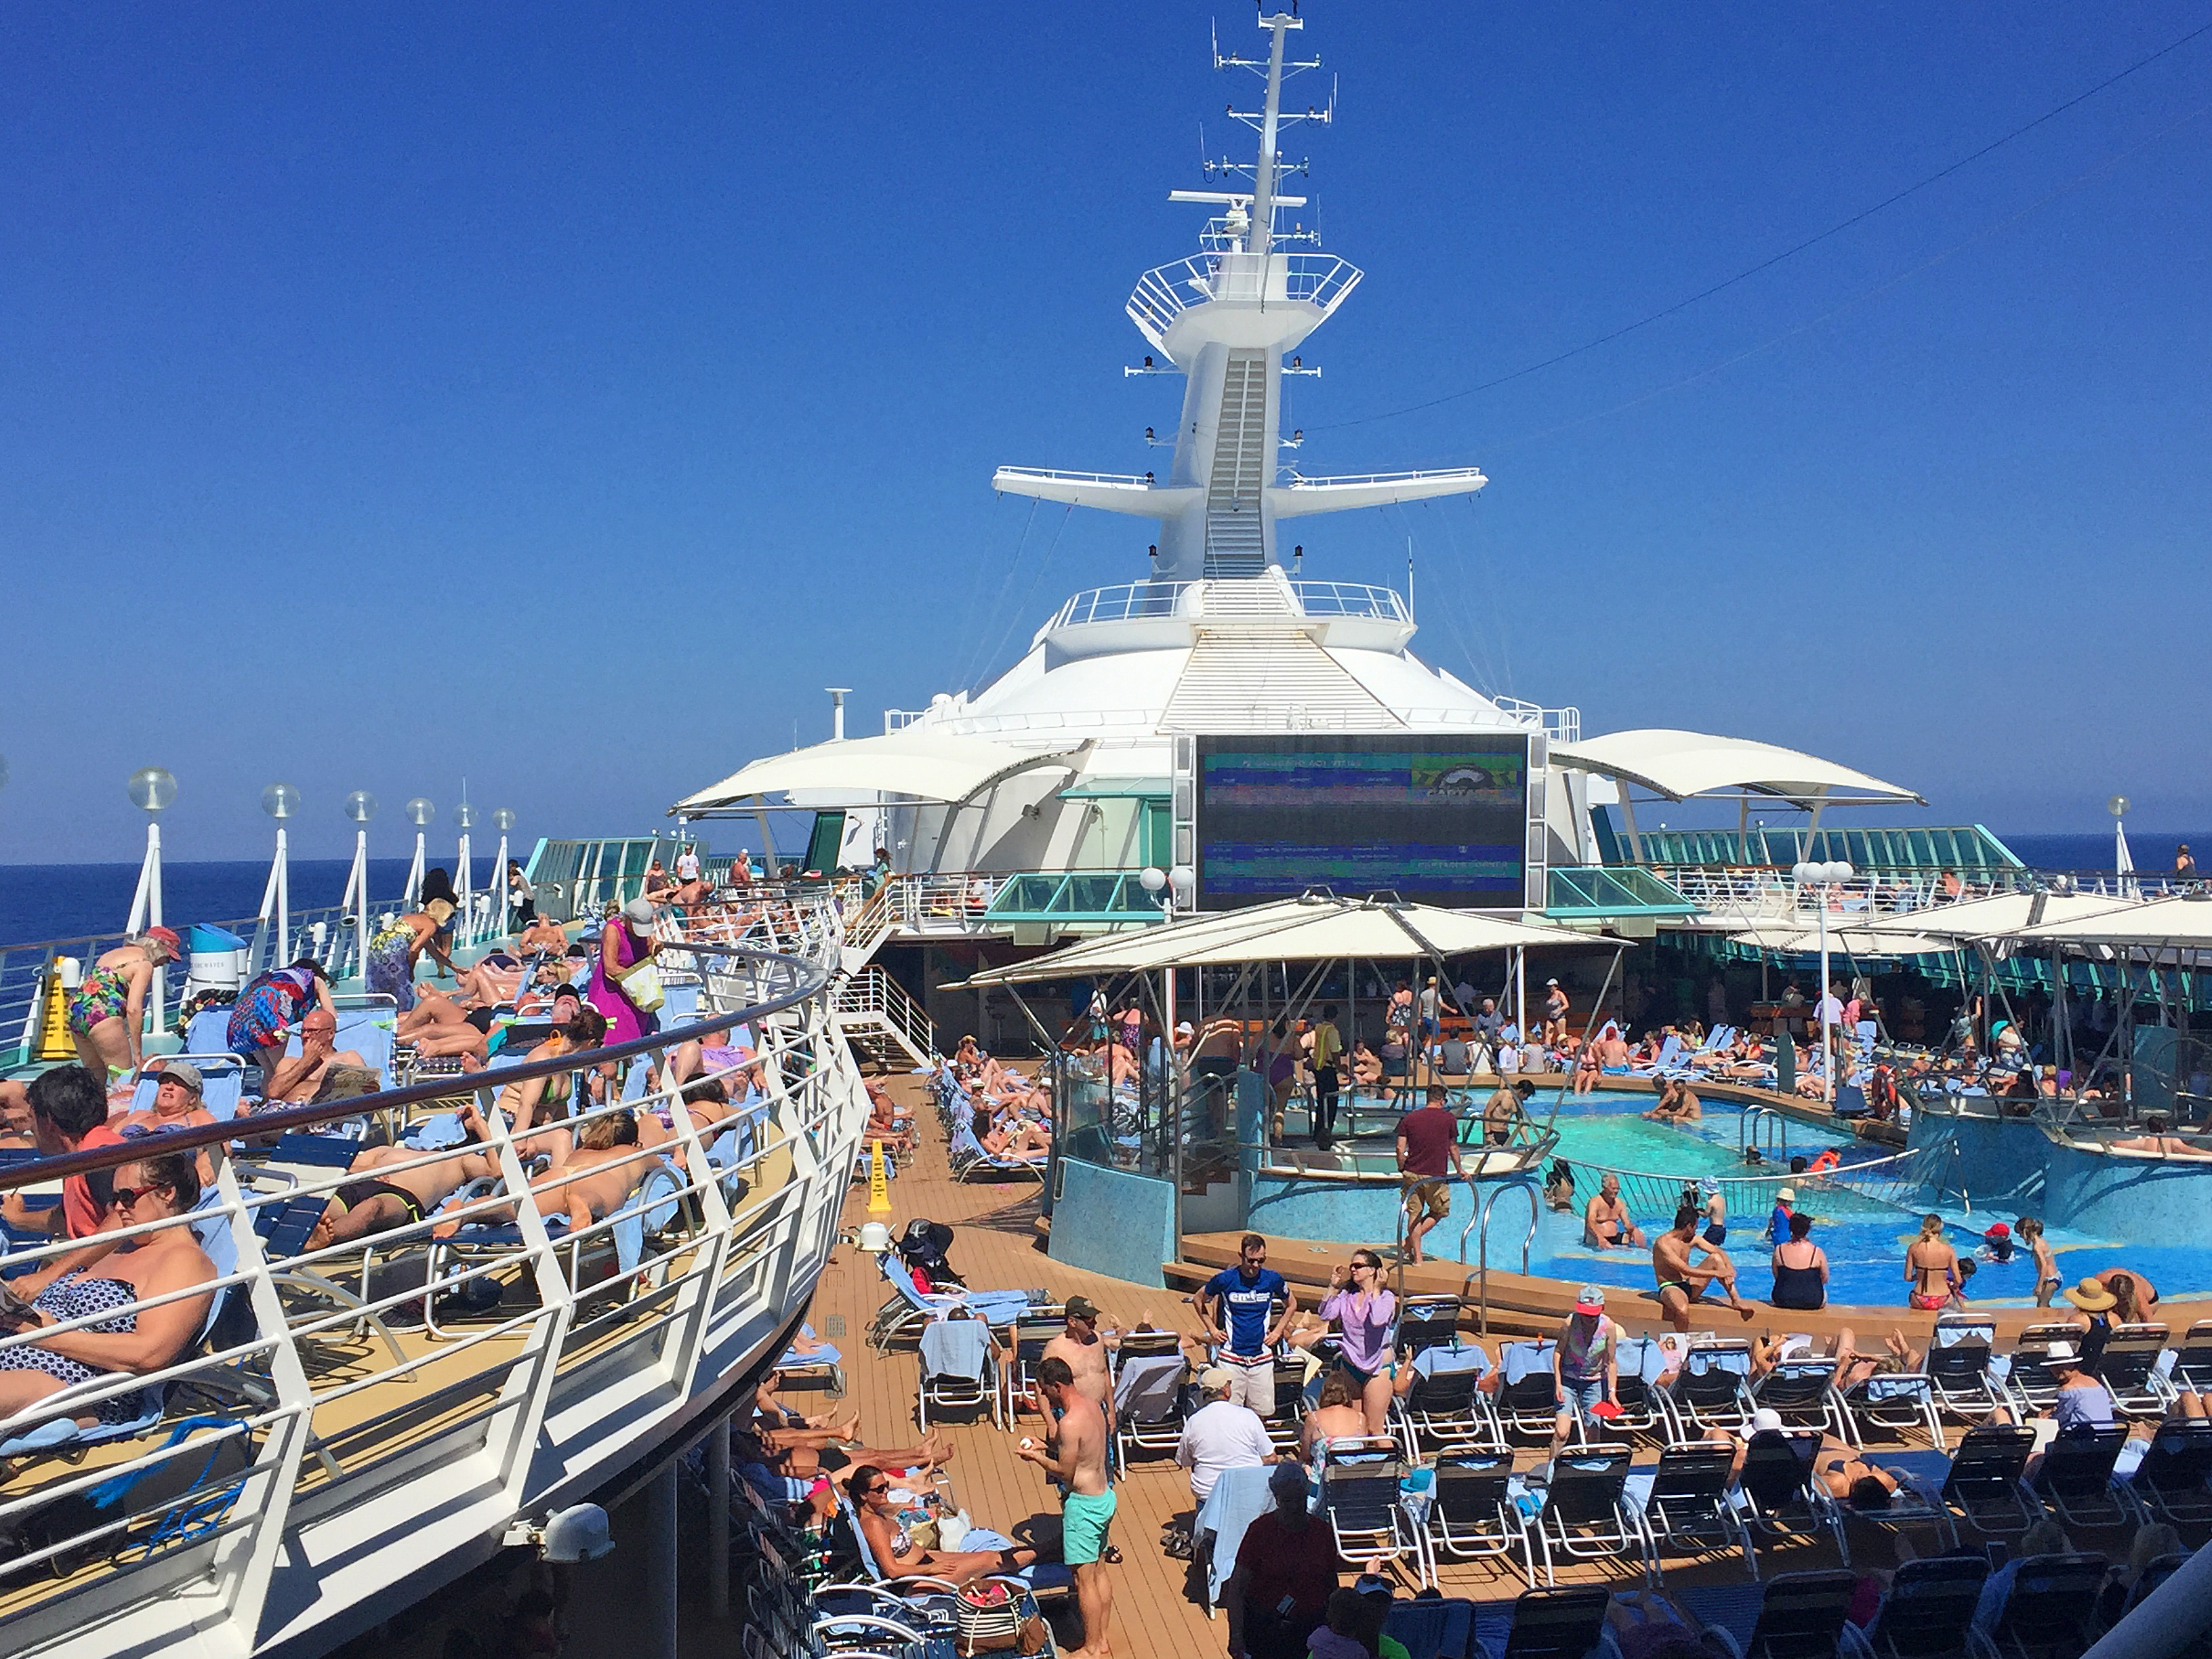 Royal Caribbean Rhapsody of the Seas • Finding Family Adventures